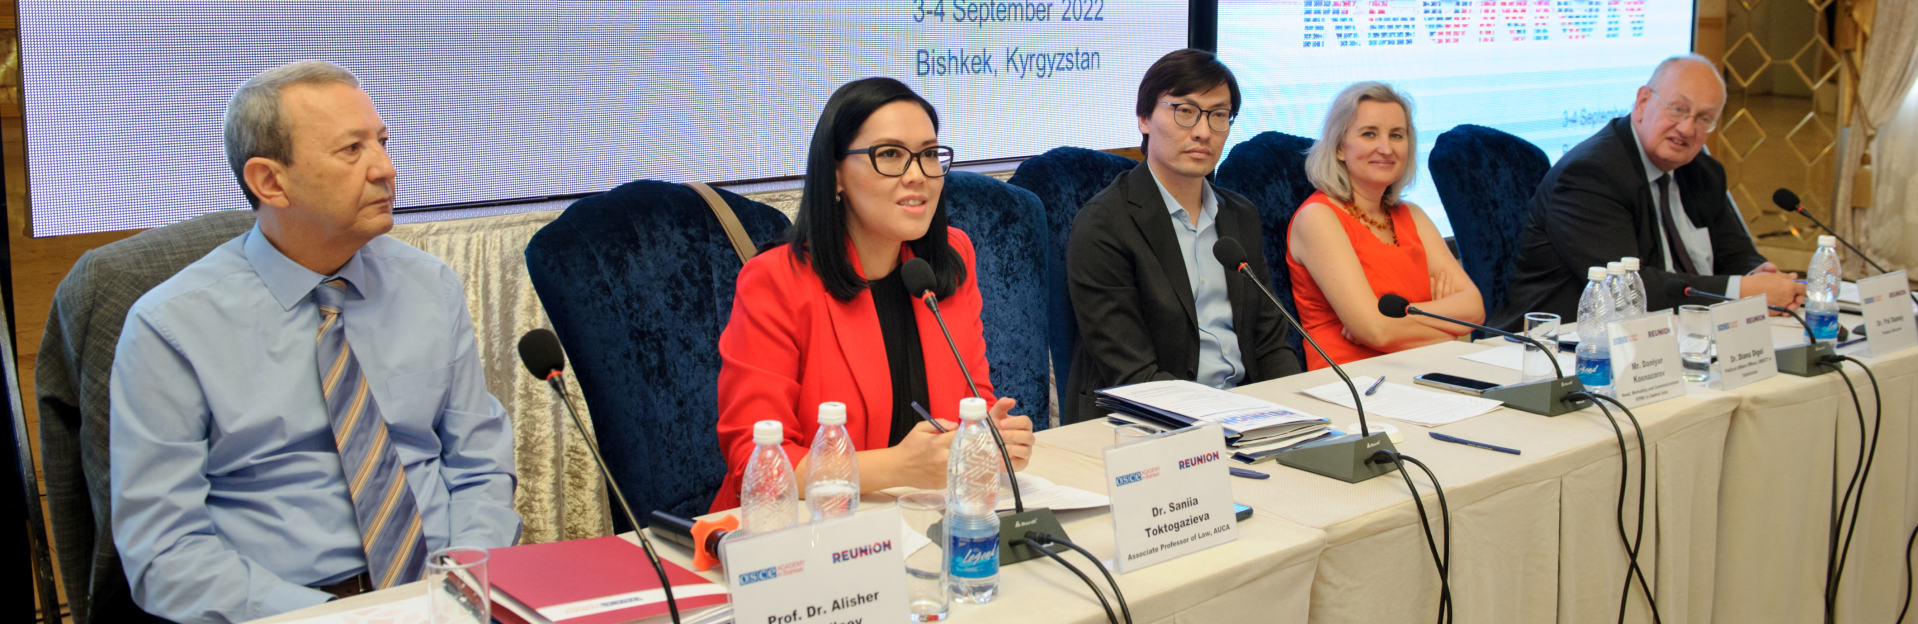 The OSCE Academy hosts scholarly conferences and expert discussions on matters pertaining to the regional security and development in Central Asia and beyond